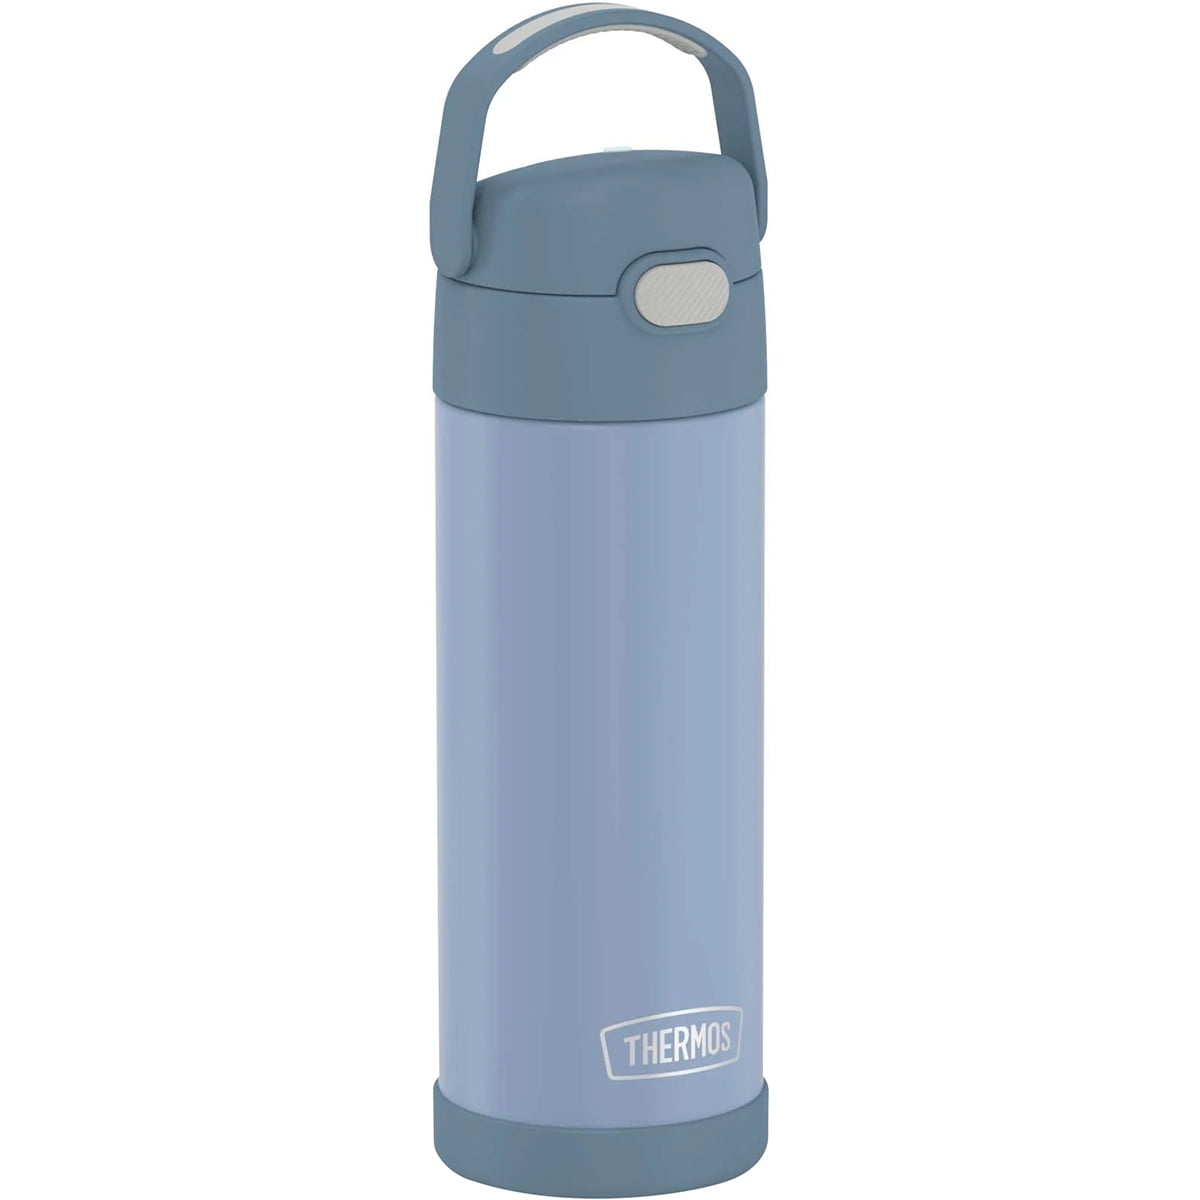 AfterShokz Water Bottle 16 oz Vacuum Insulated Stainless Steel New 10” tall  box